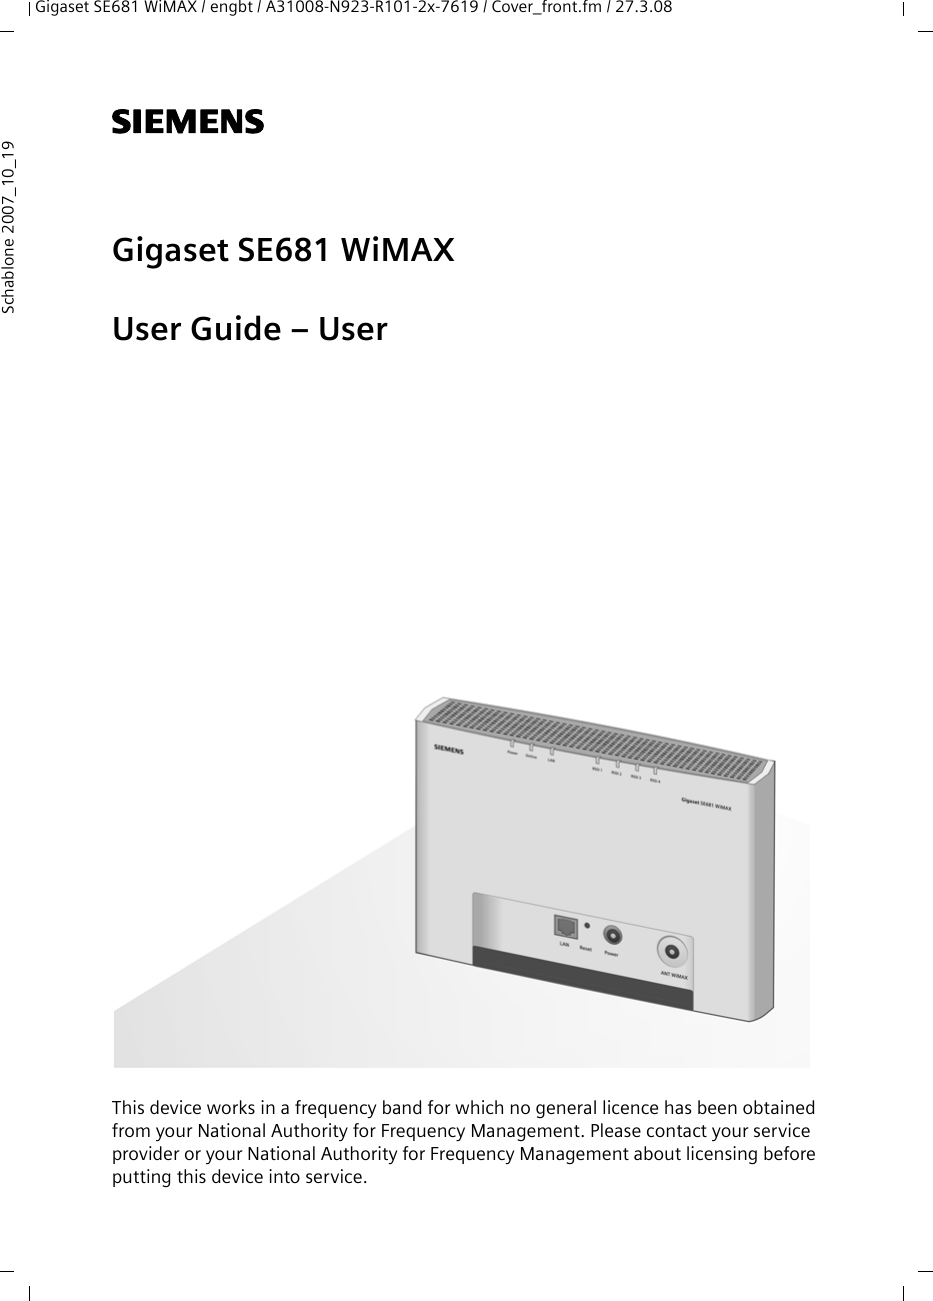 Gigaset SE681 WiMAX / engbt / A31008-N923-R101-2x-7619 / Cover_front.fm / 27.3.08Schablone 2007_10_19s Gigaset SE681 WiMAXUser Guide – UserThis device works in a frequency band for which no general licence has been obtained from your National Authority for Frequency Management. Please contact your service provider or your National Authority for Frequency Management about licensing before putting this device into service.